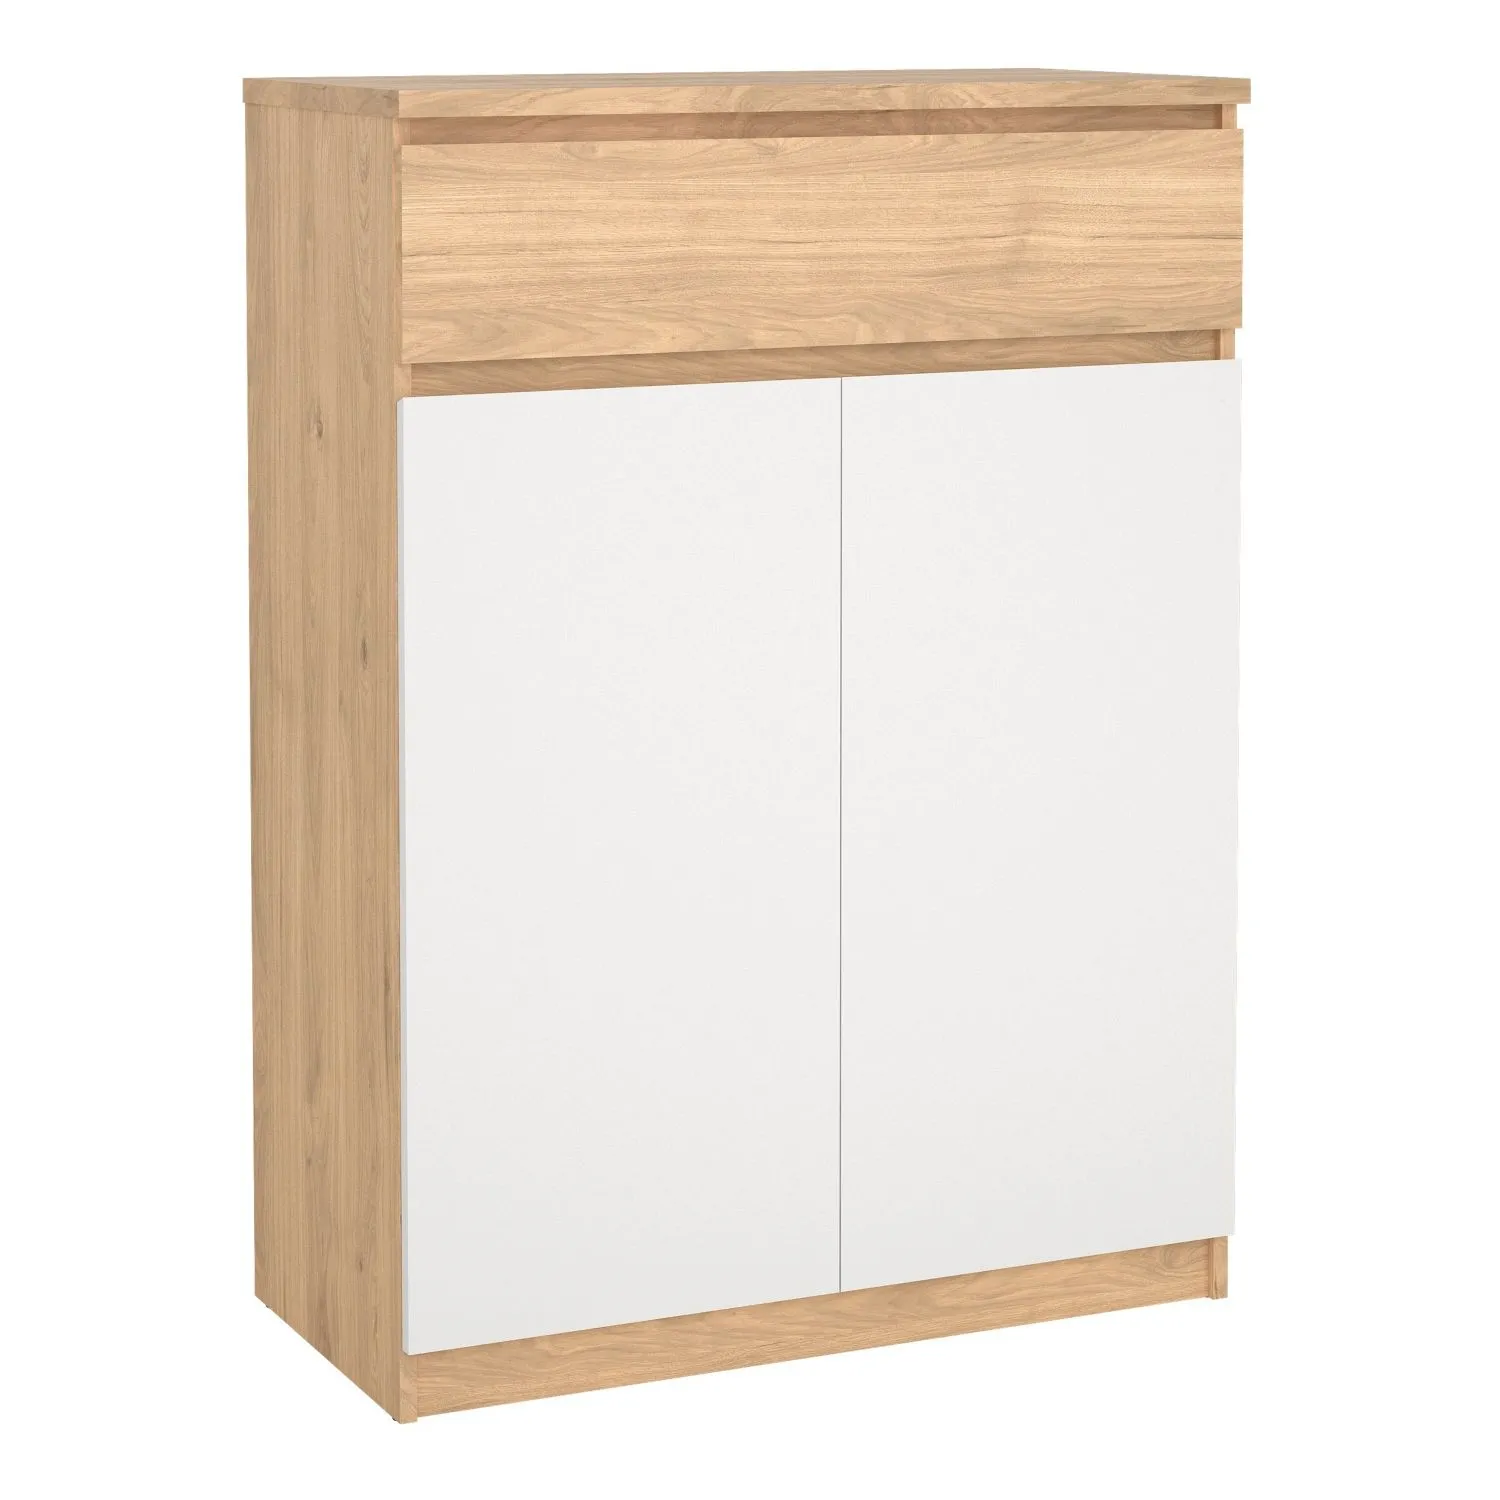 Naia Shoe Cabinet with 2 Doors +1 Drawer in Jackson Hickory Oak and white